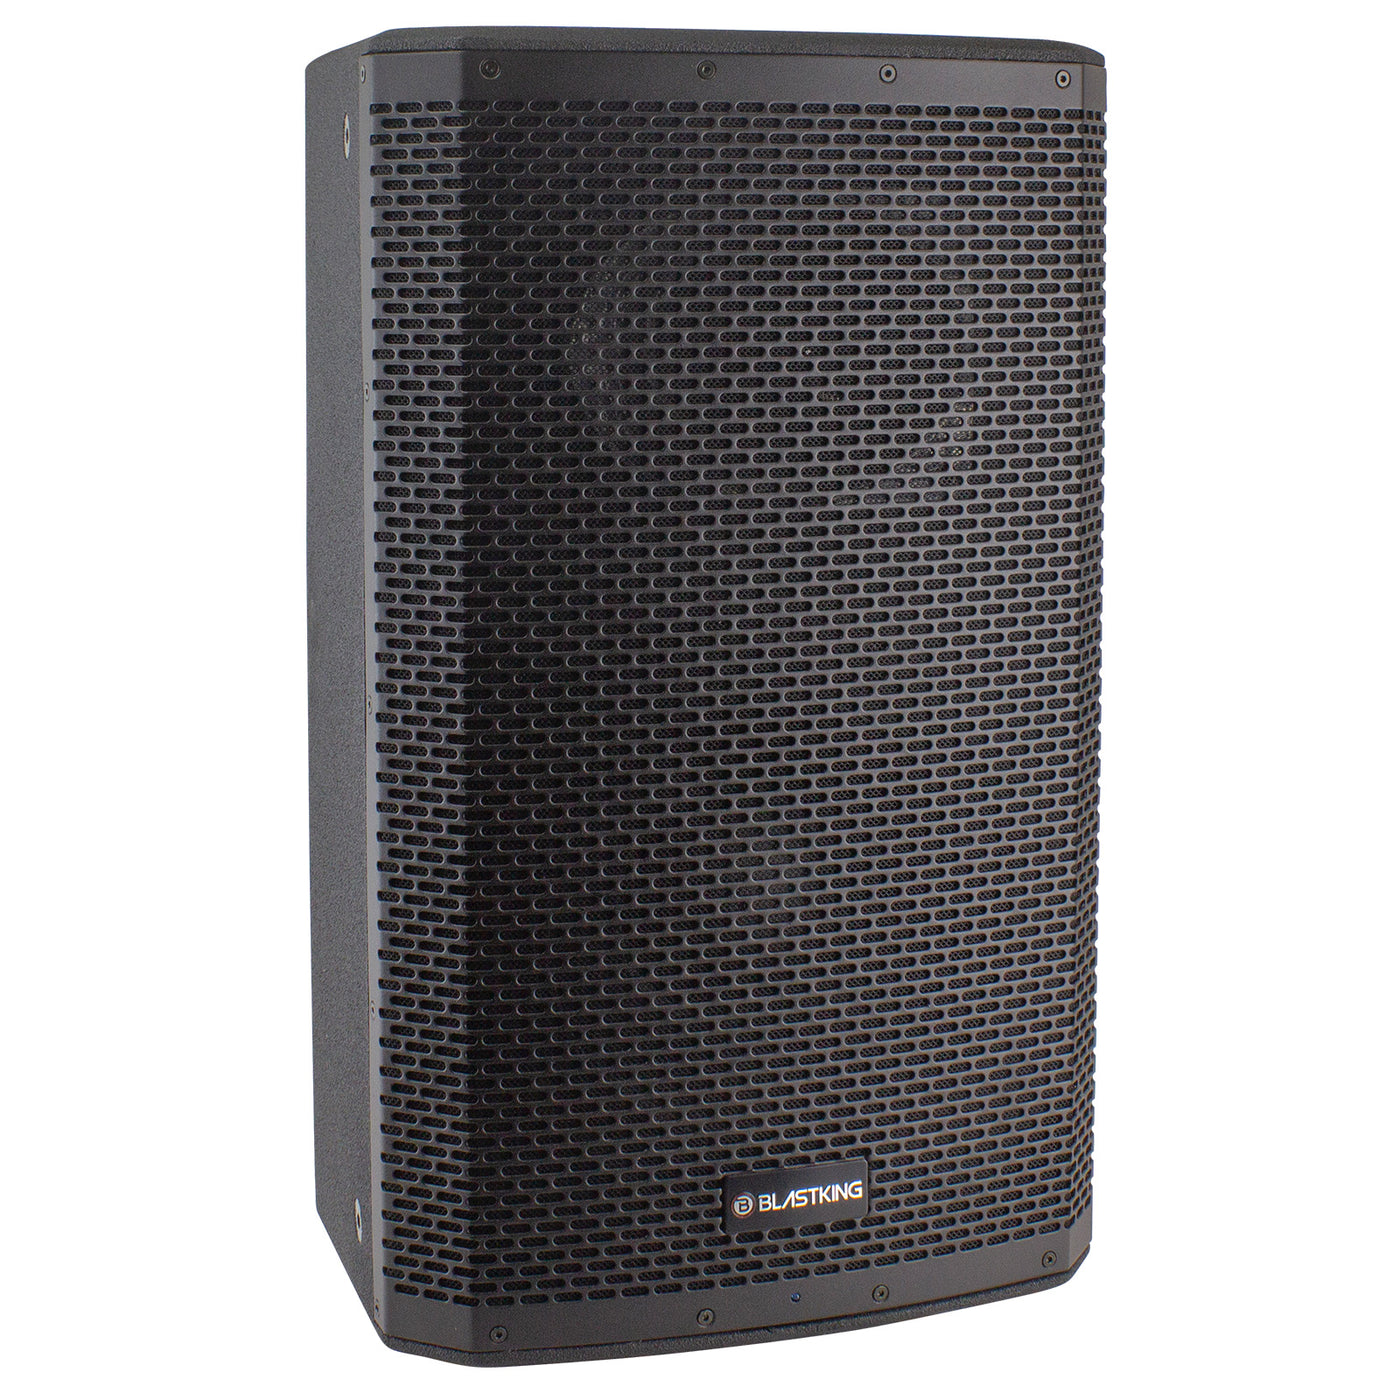 Blastking KXDII10A-PREMIUM (2) 10” Active Loudspeakers 1000 Watts Class-D Bi Amp DSP Mode with Stands and Cables